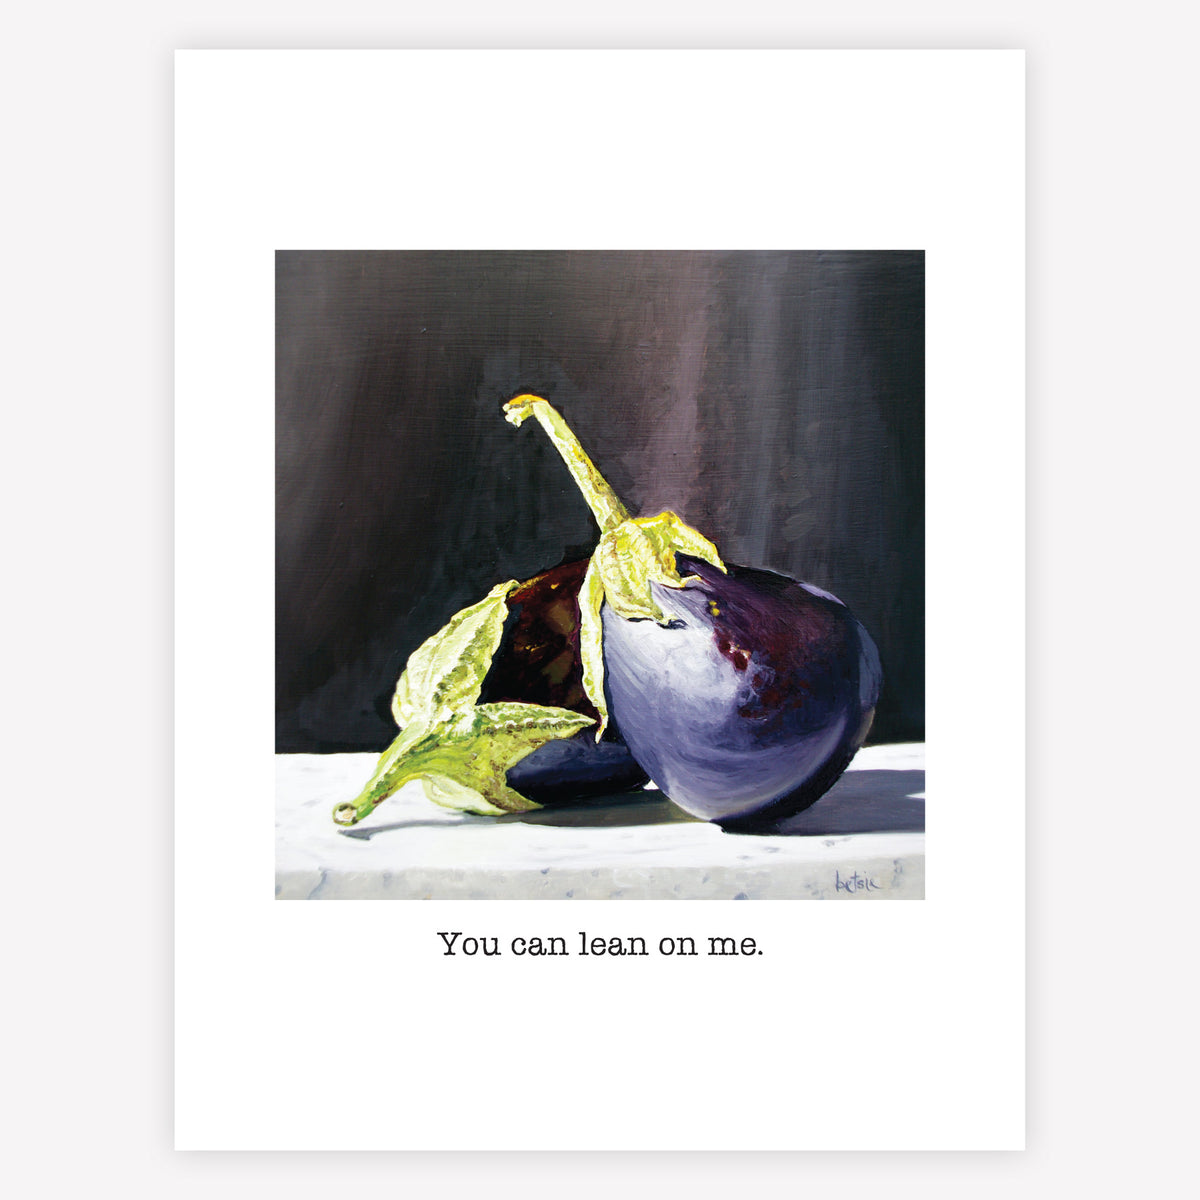 "You can lean on me" Greeting Card